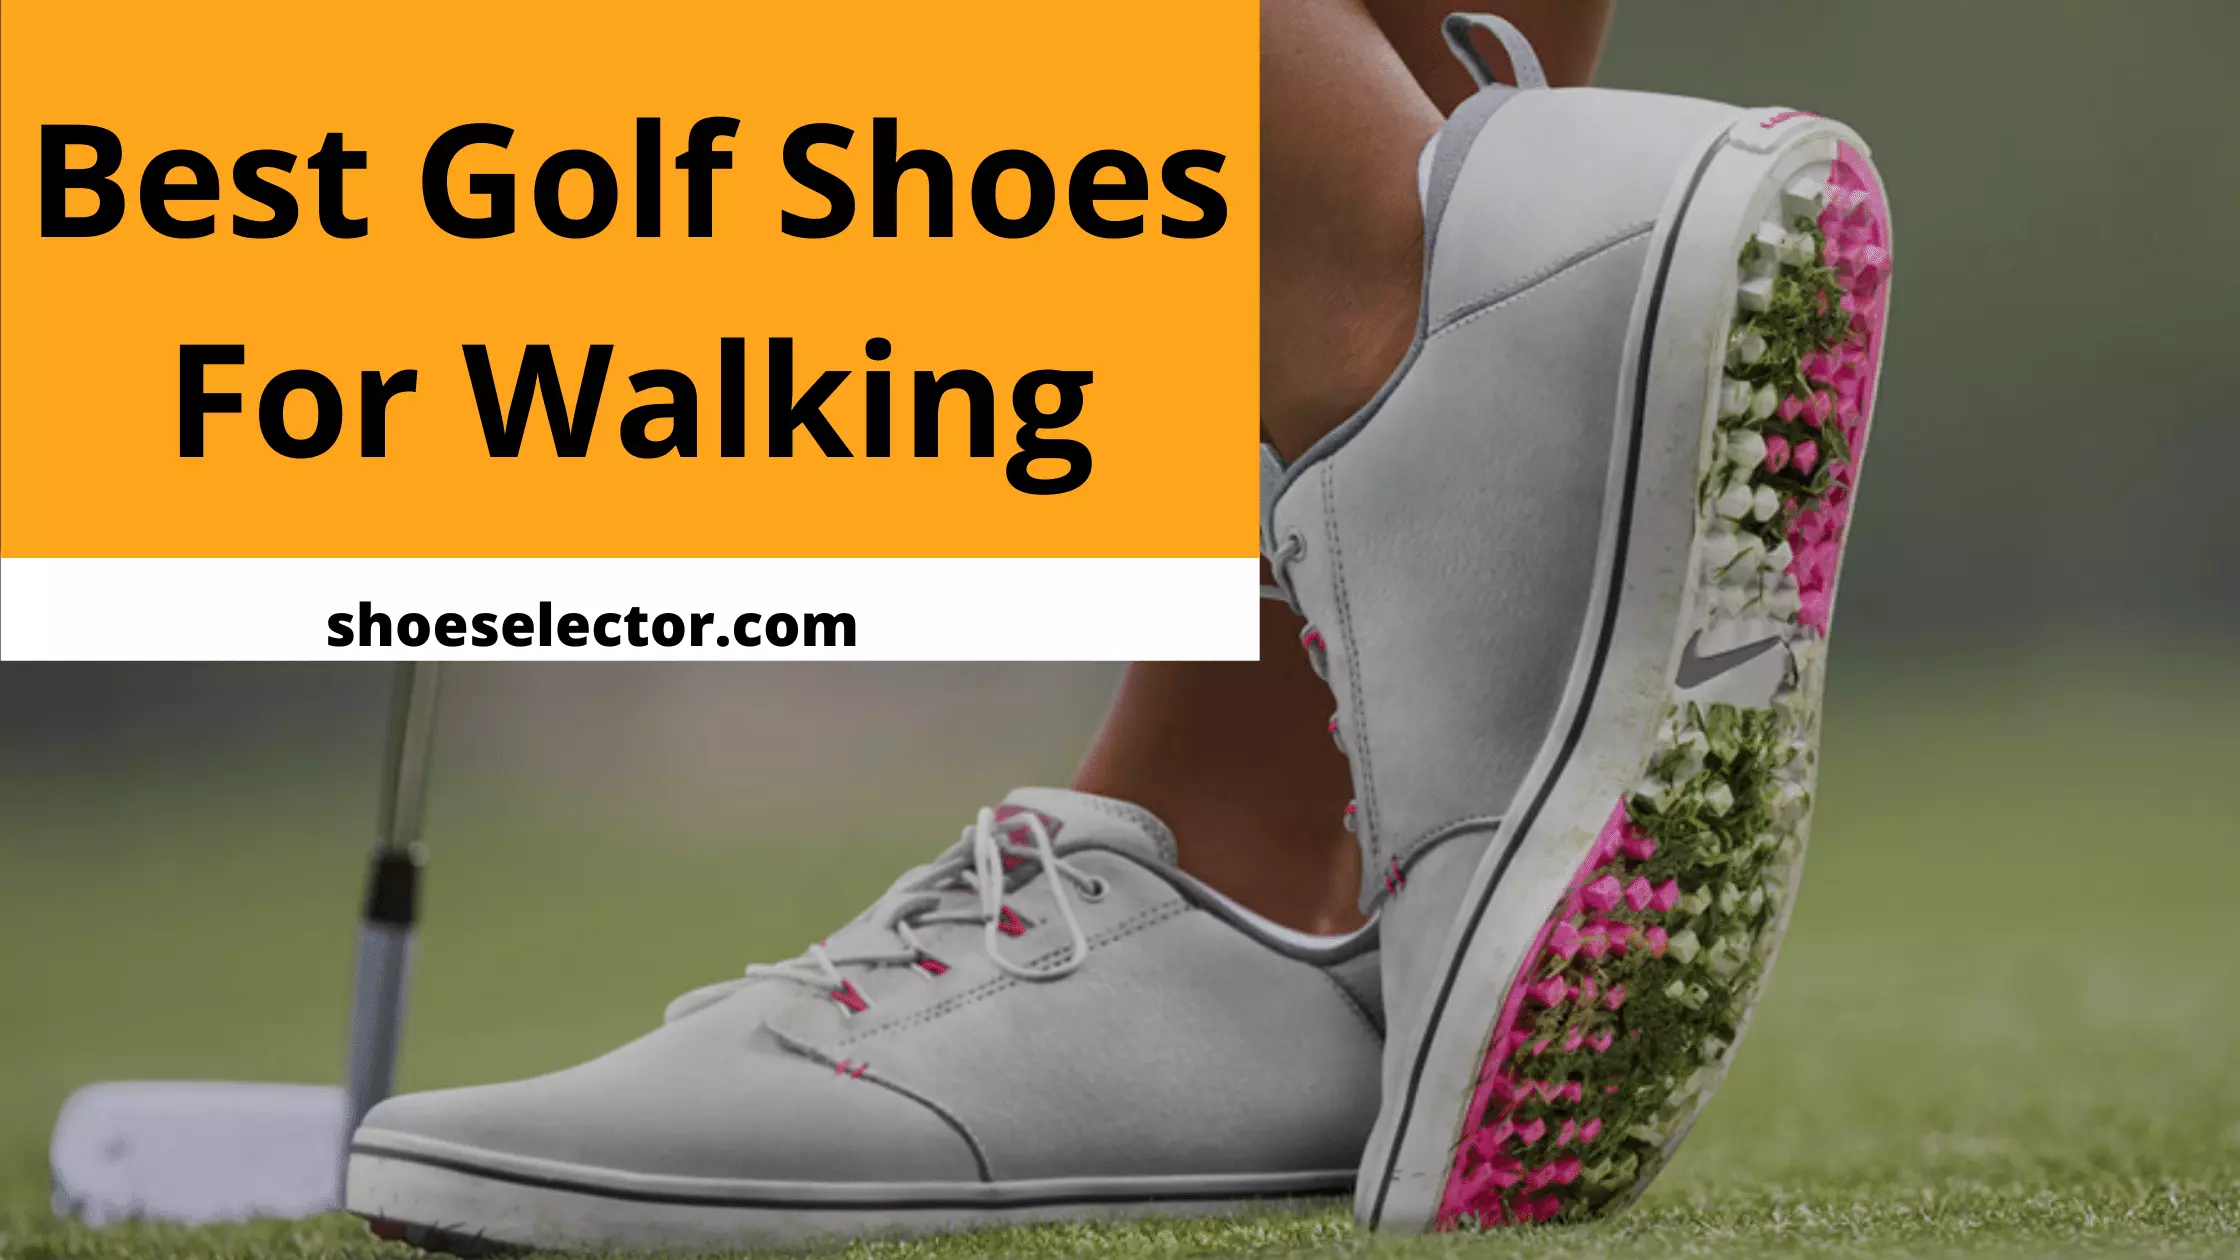 Best Golf Shoes For Walking - Complete Buying Guides